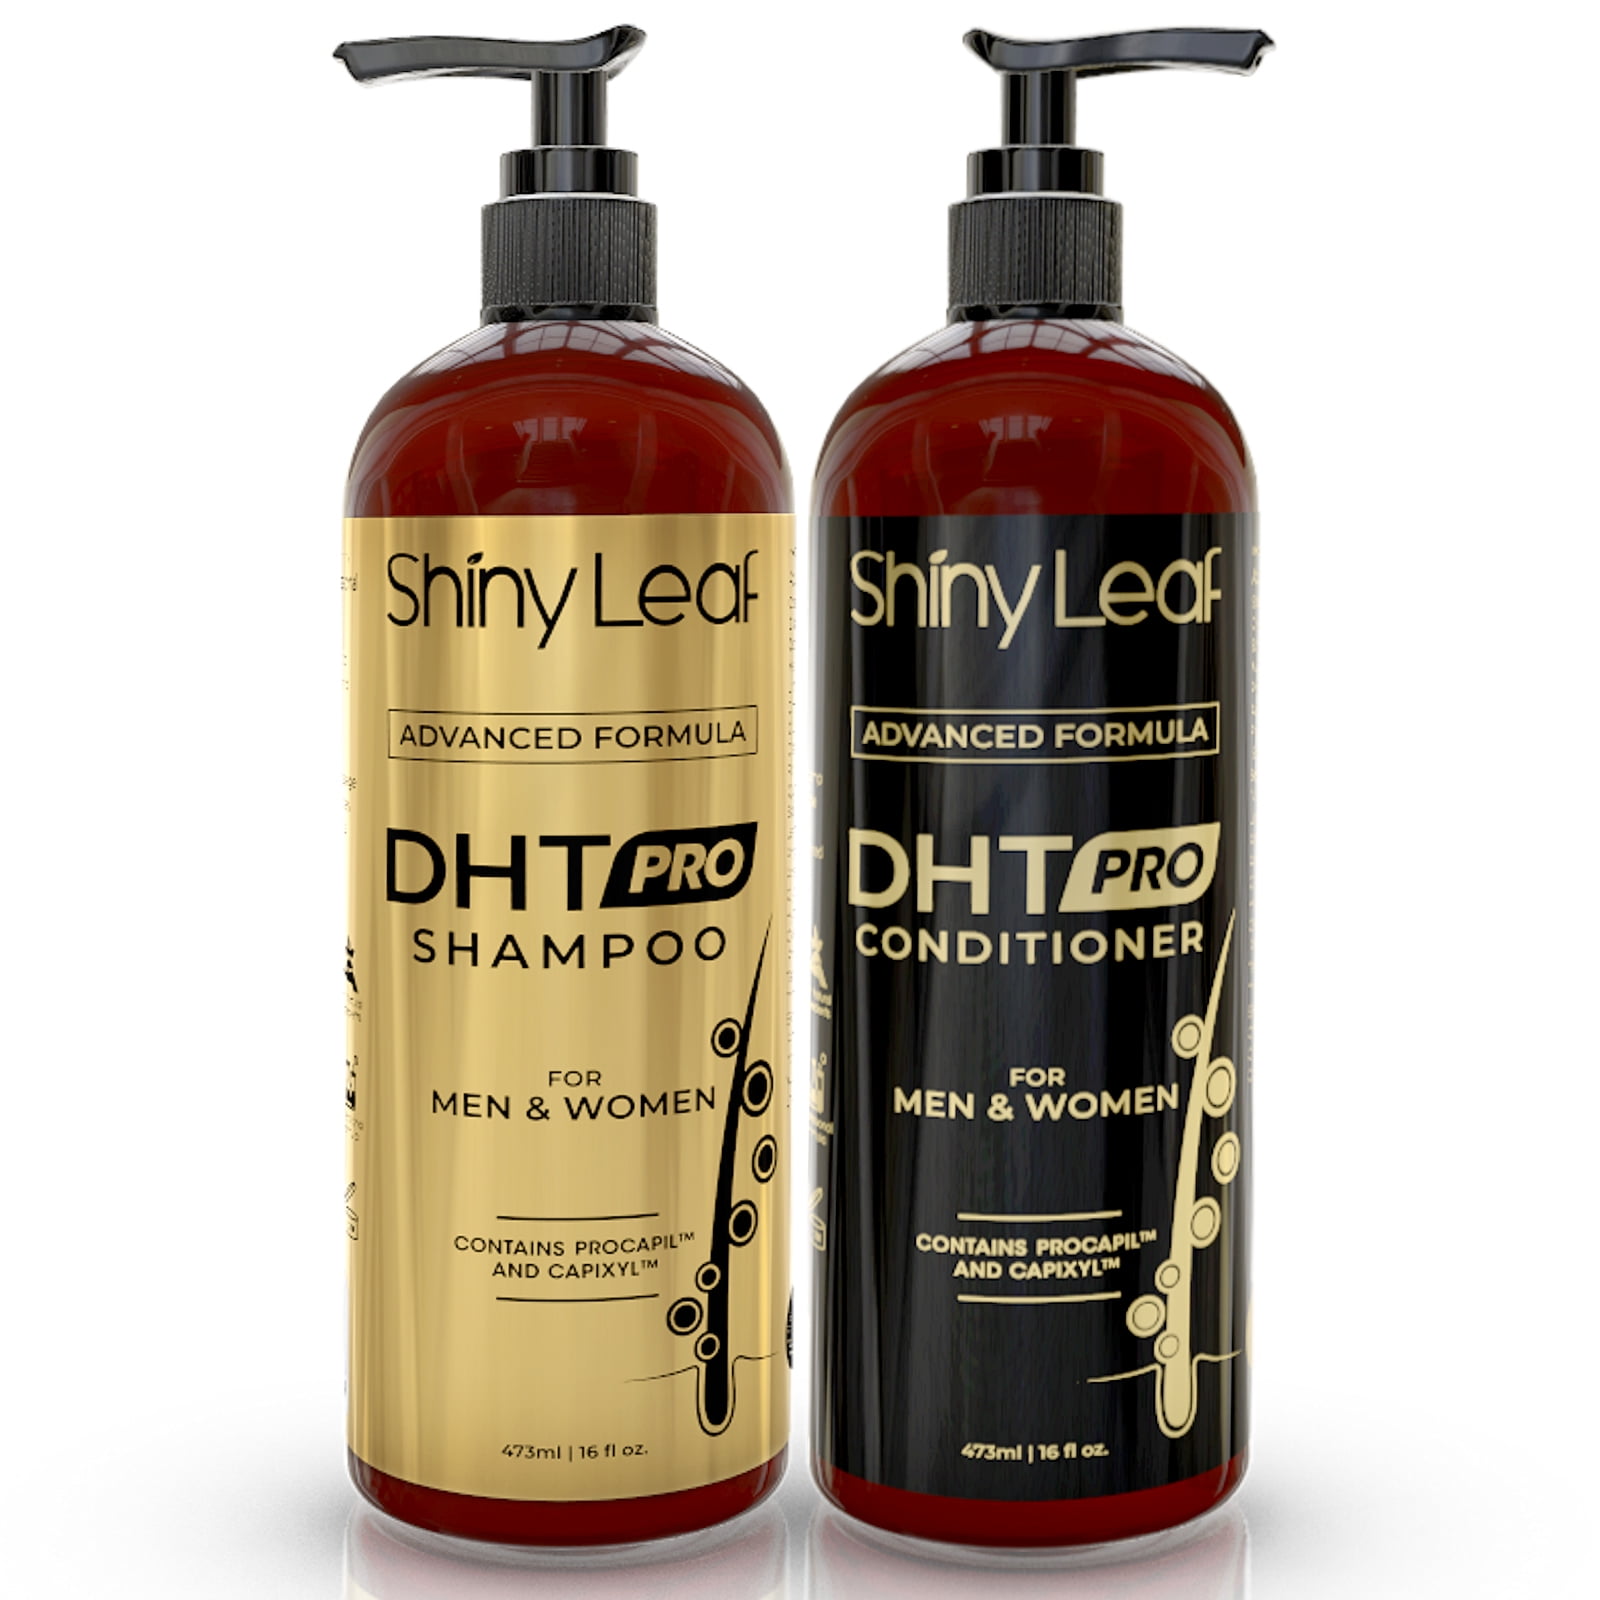 W product #drsquatch #menhairstyle #shampoo #review, Shampoo Reviews